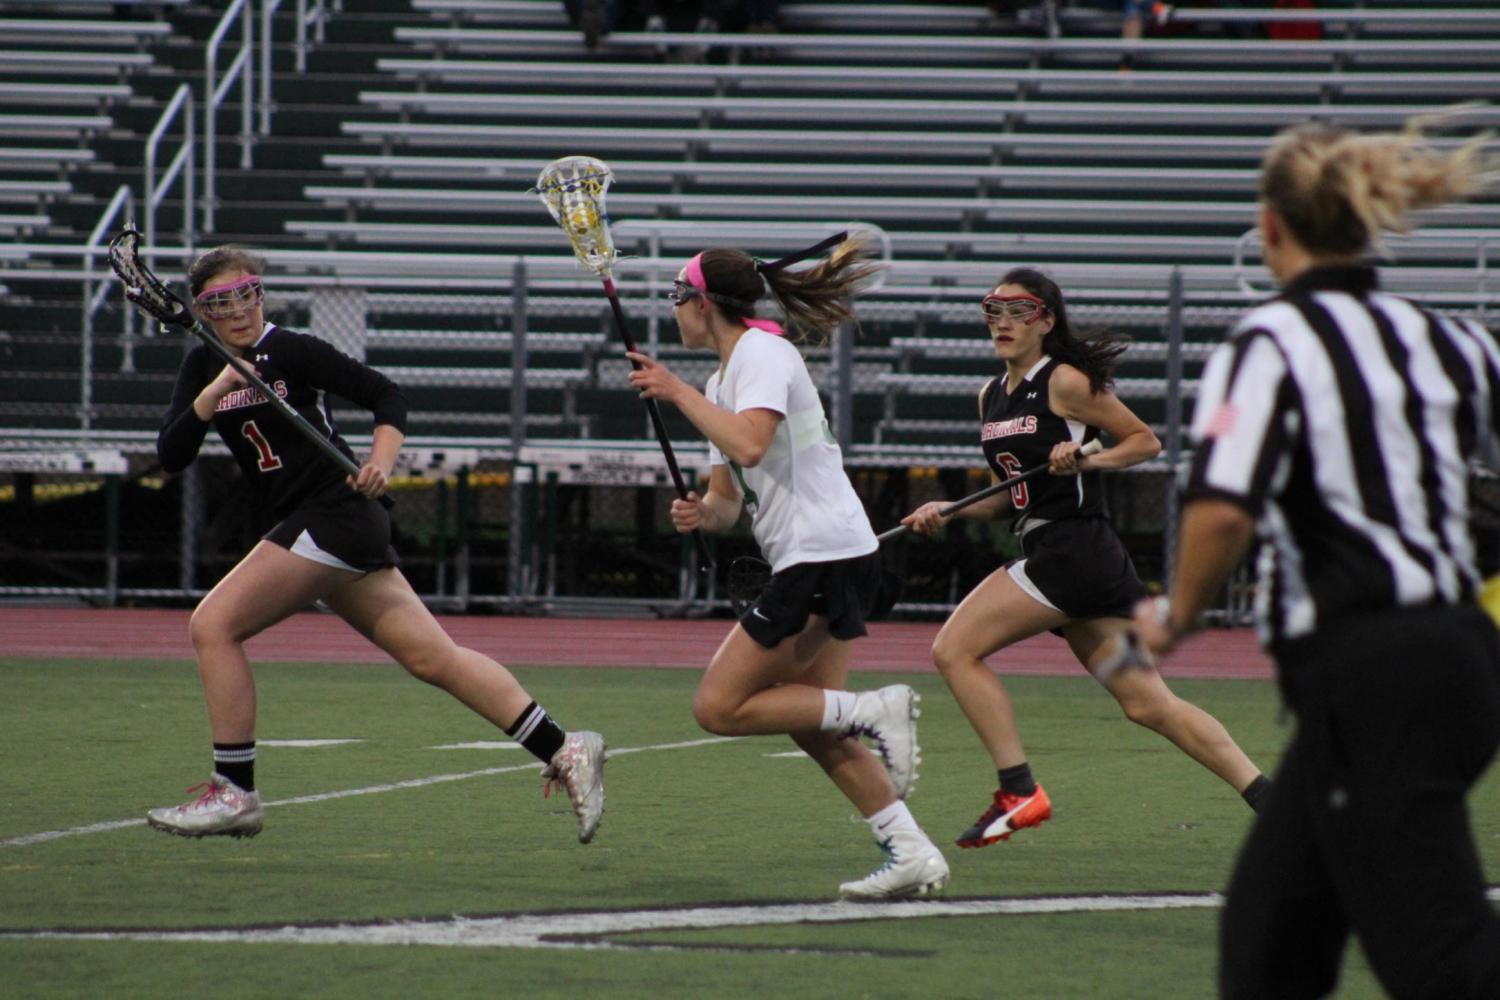 Elisabeth Ralph will look to once again be the driving force for the Pascack Valley offense in the second round of the Bergen County Tournament